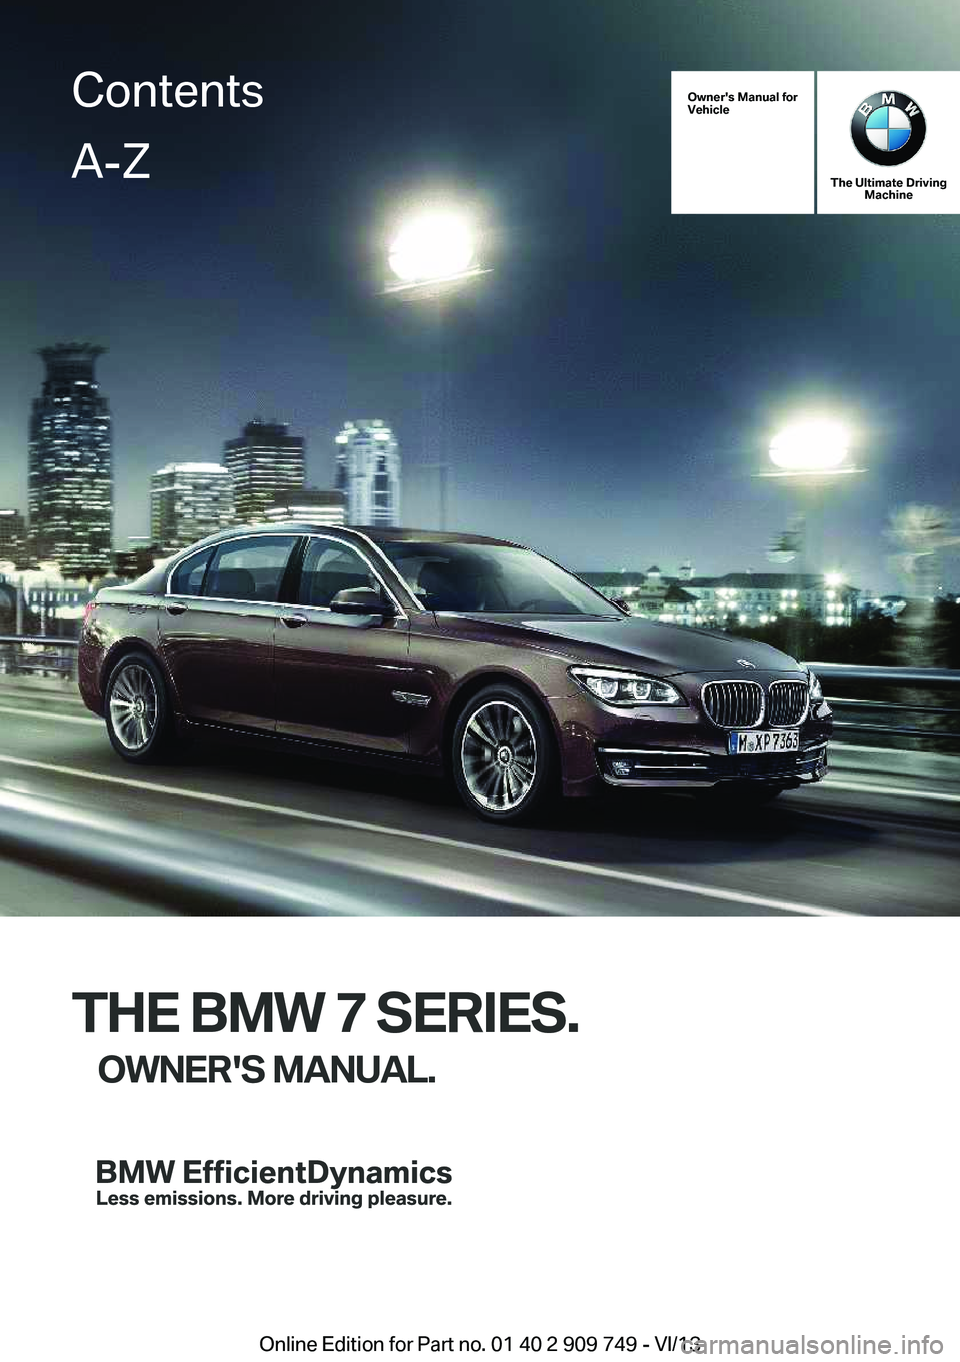 BMW 740I 2014  Owners Manual Owner's Manual for
Vehicle
The Ultimate Driving Machine
THE BMW 7 SERIES.
OWNER'S MANUAL.
ContentsA-Z
Online Edition for Part no. 01 40 2 909 749 - VI/13   